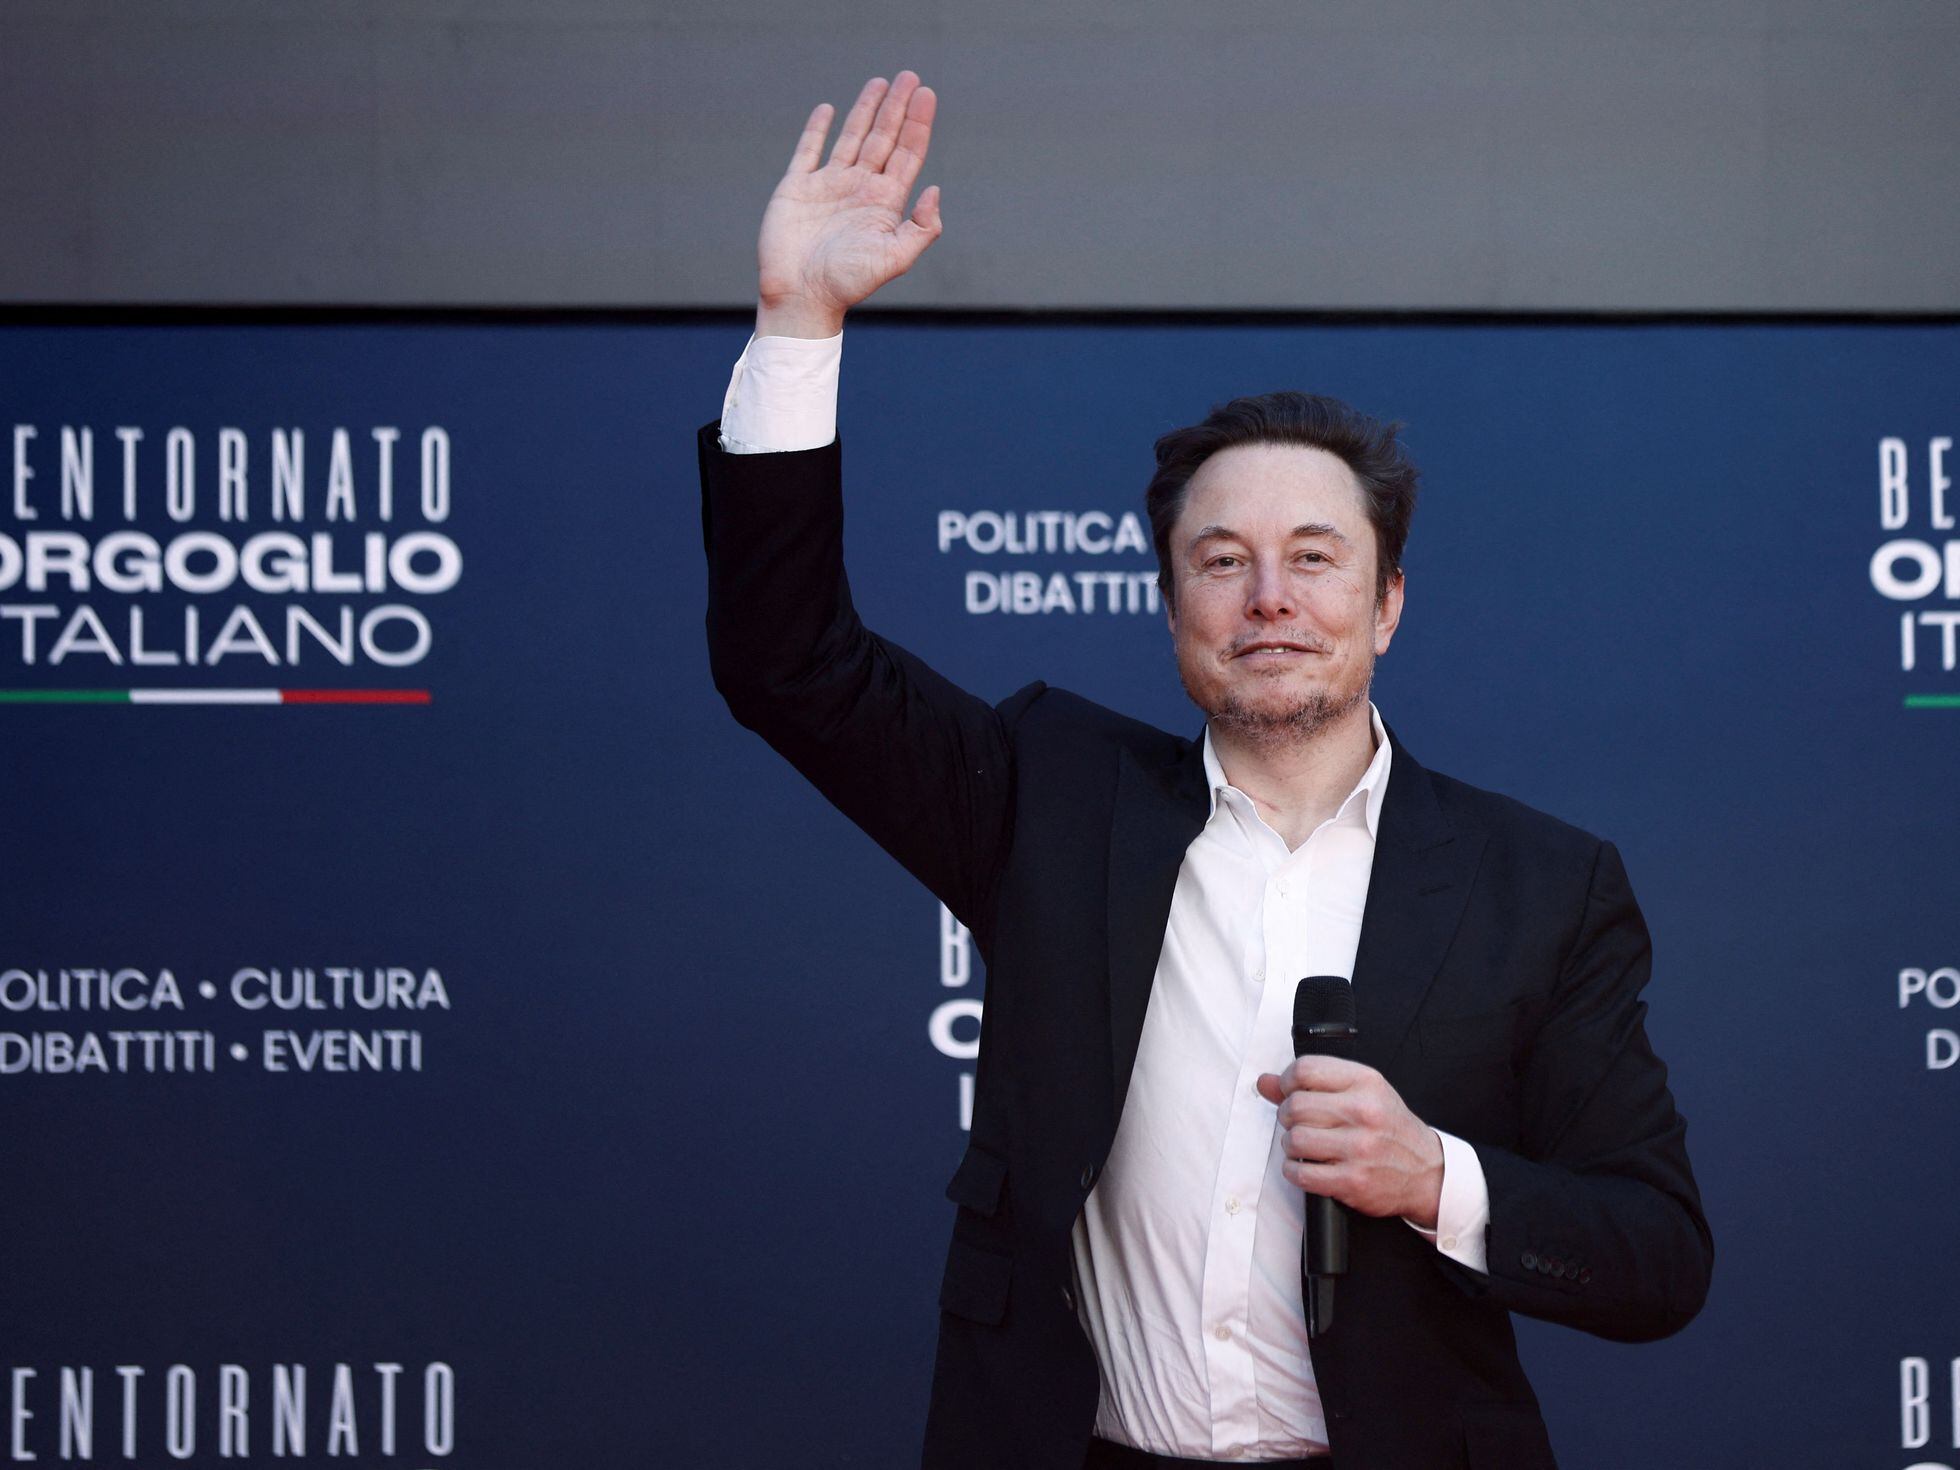 Elon Musk criticized by civil rights groups for anti-DEI posts